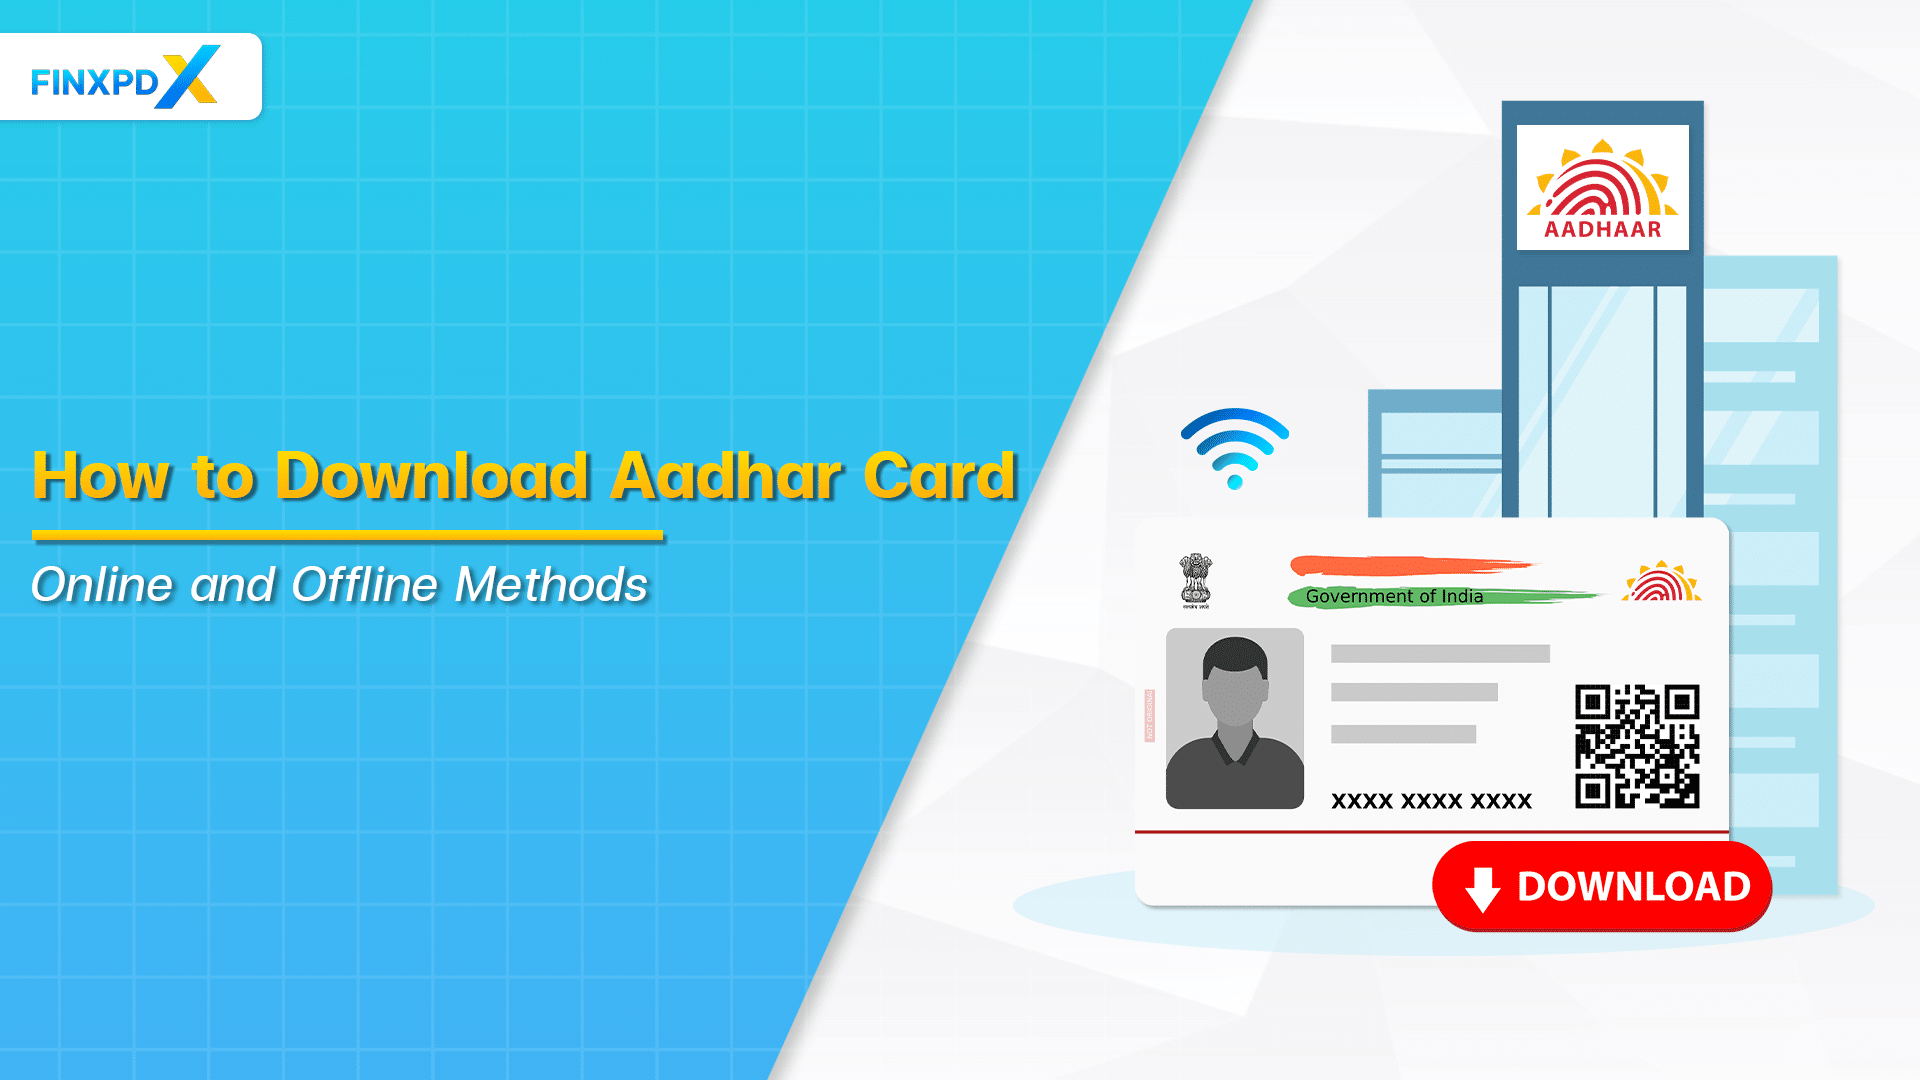 How to Download Aadhar Card: A Beginner's Guide - Financial